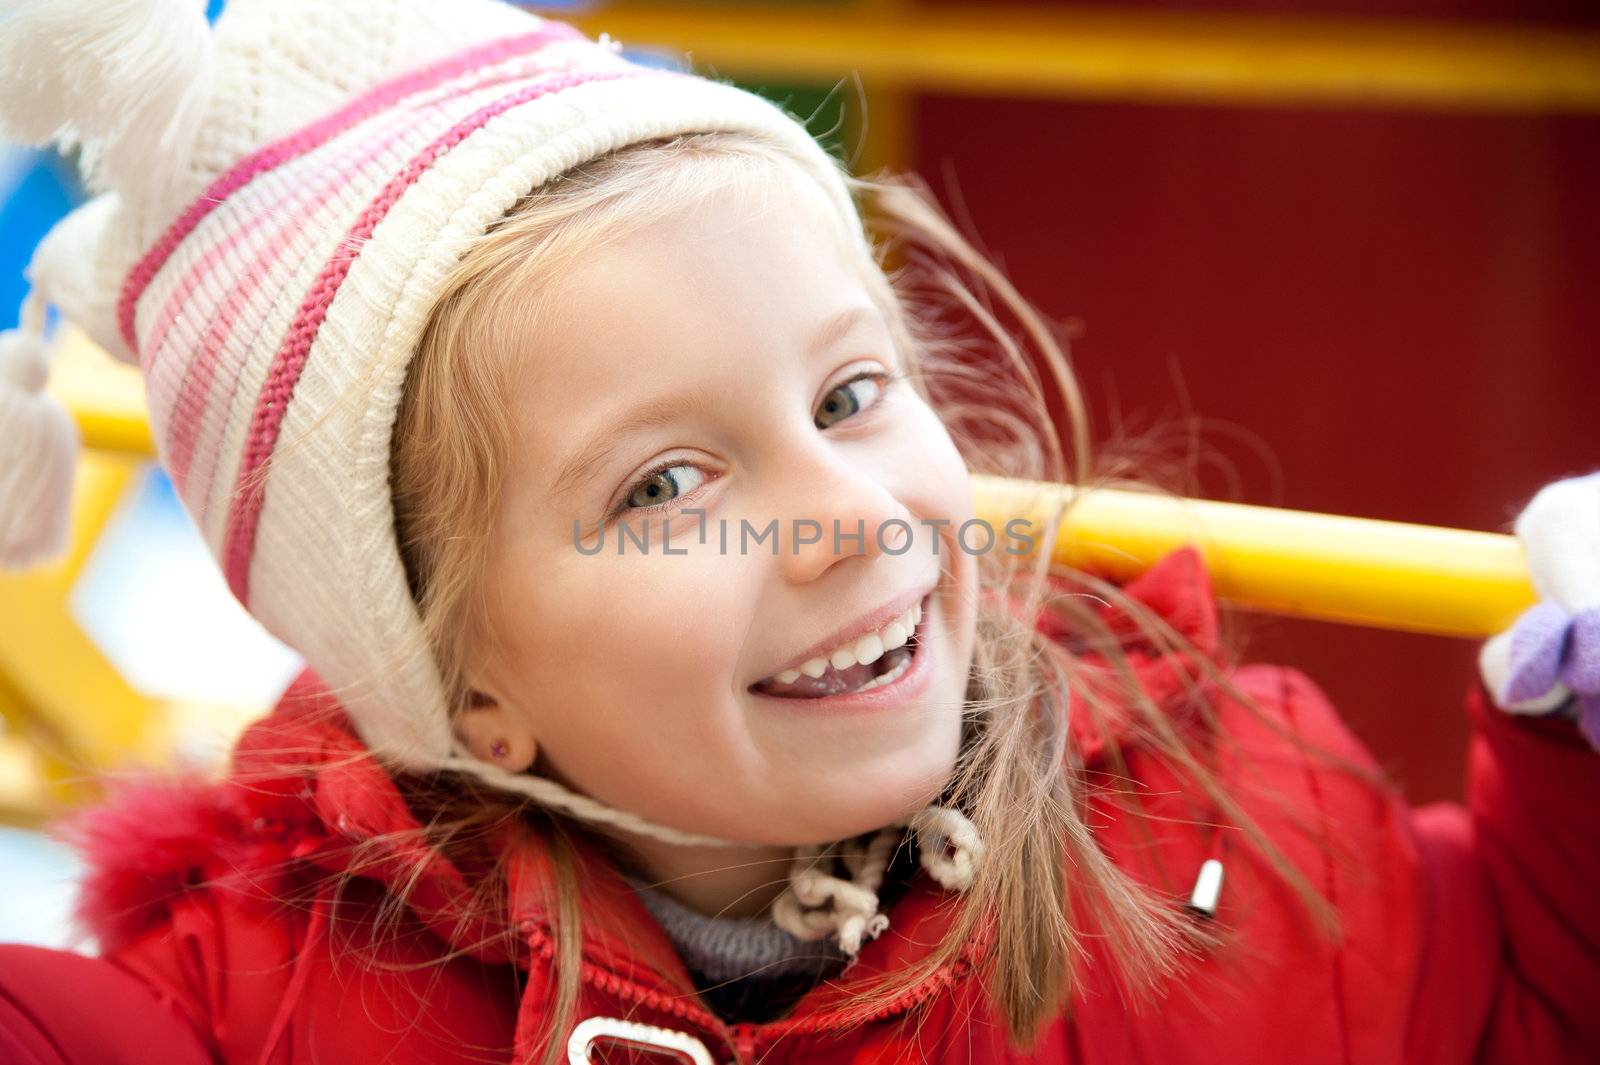 Smiling face of little girl on outdoor playground